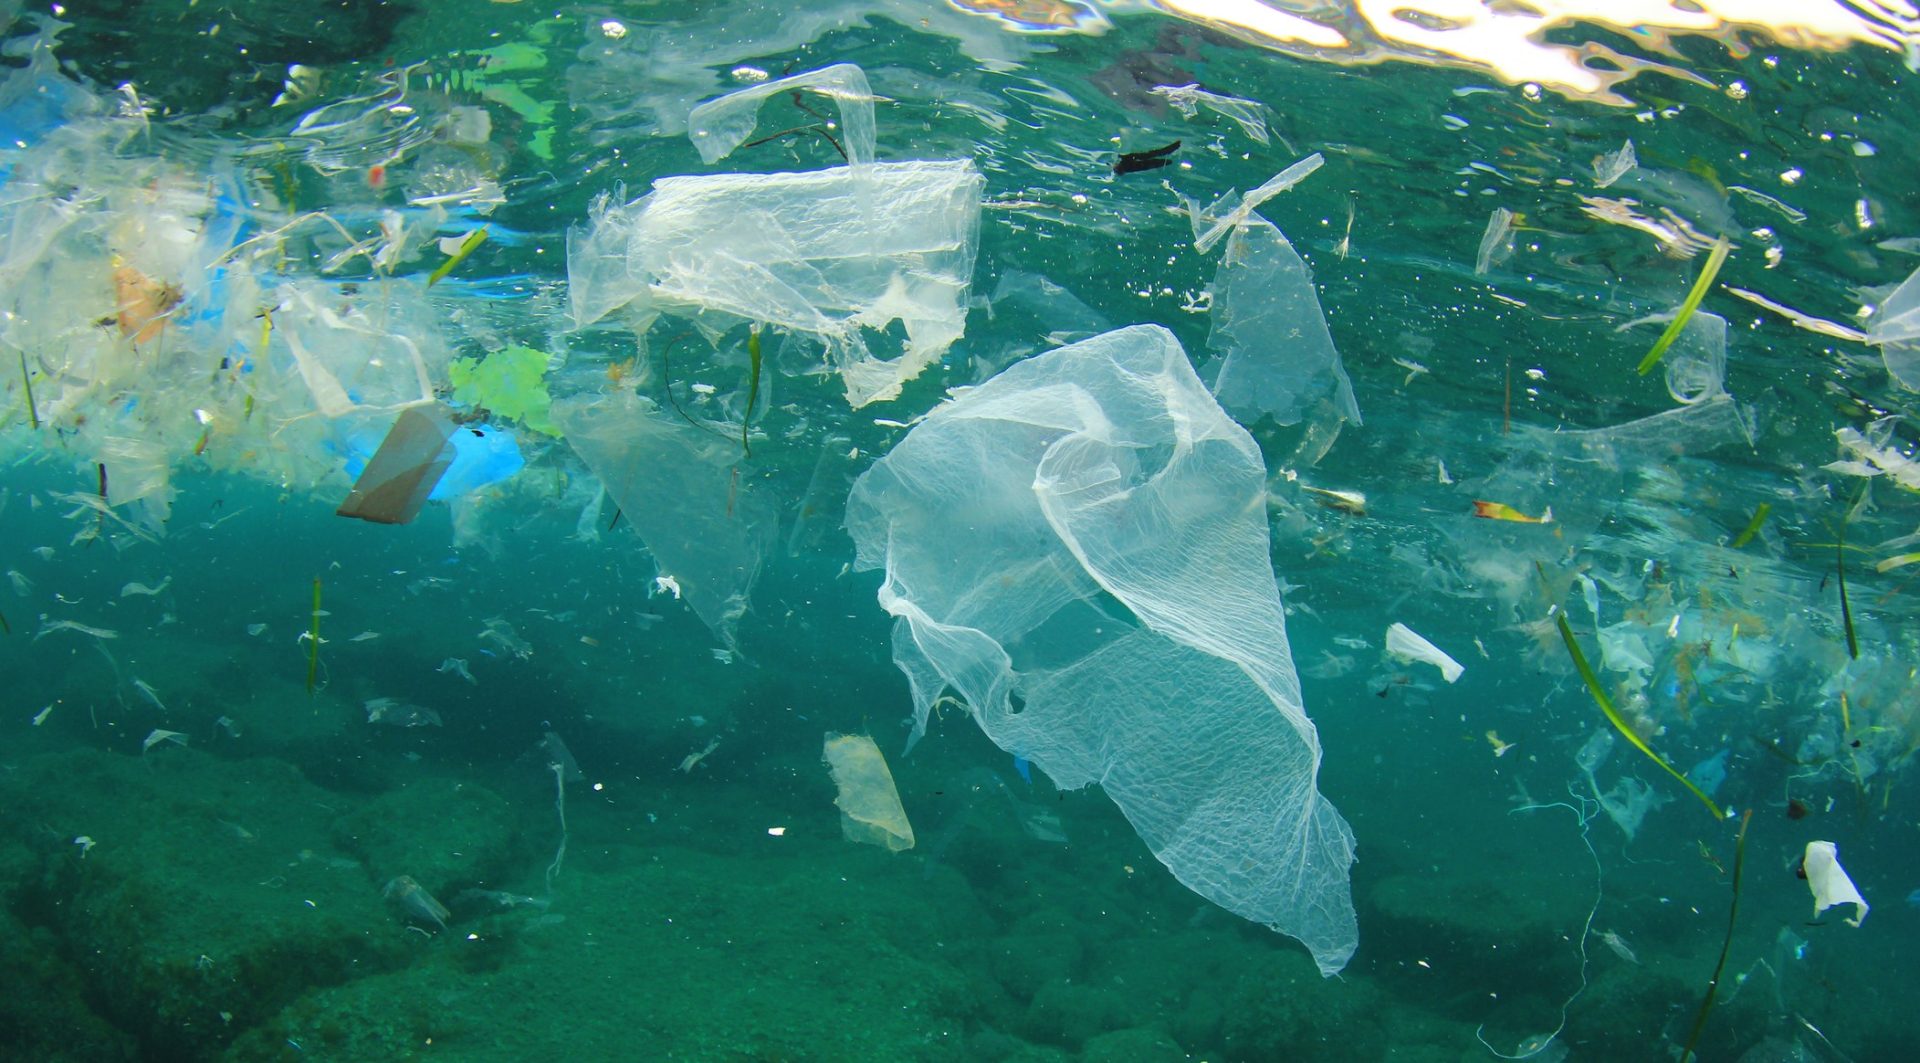 ocean polluted with various pieces of plastic